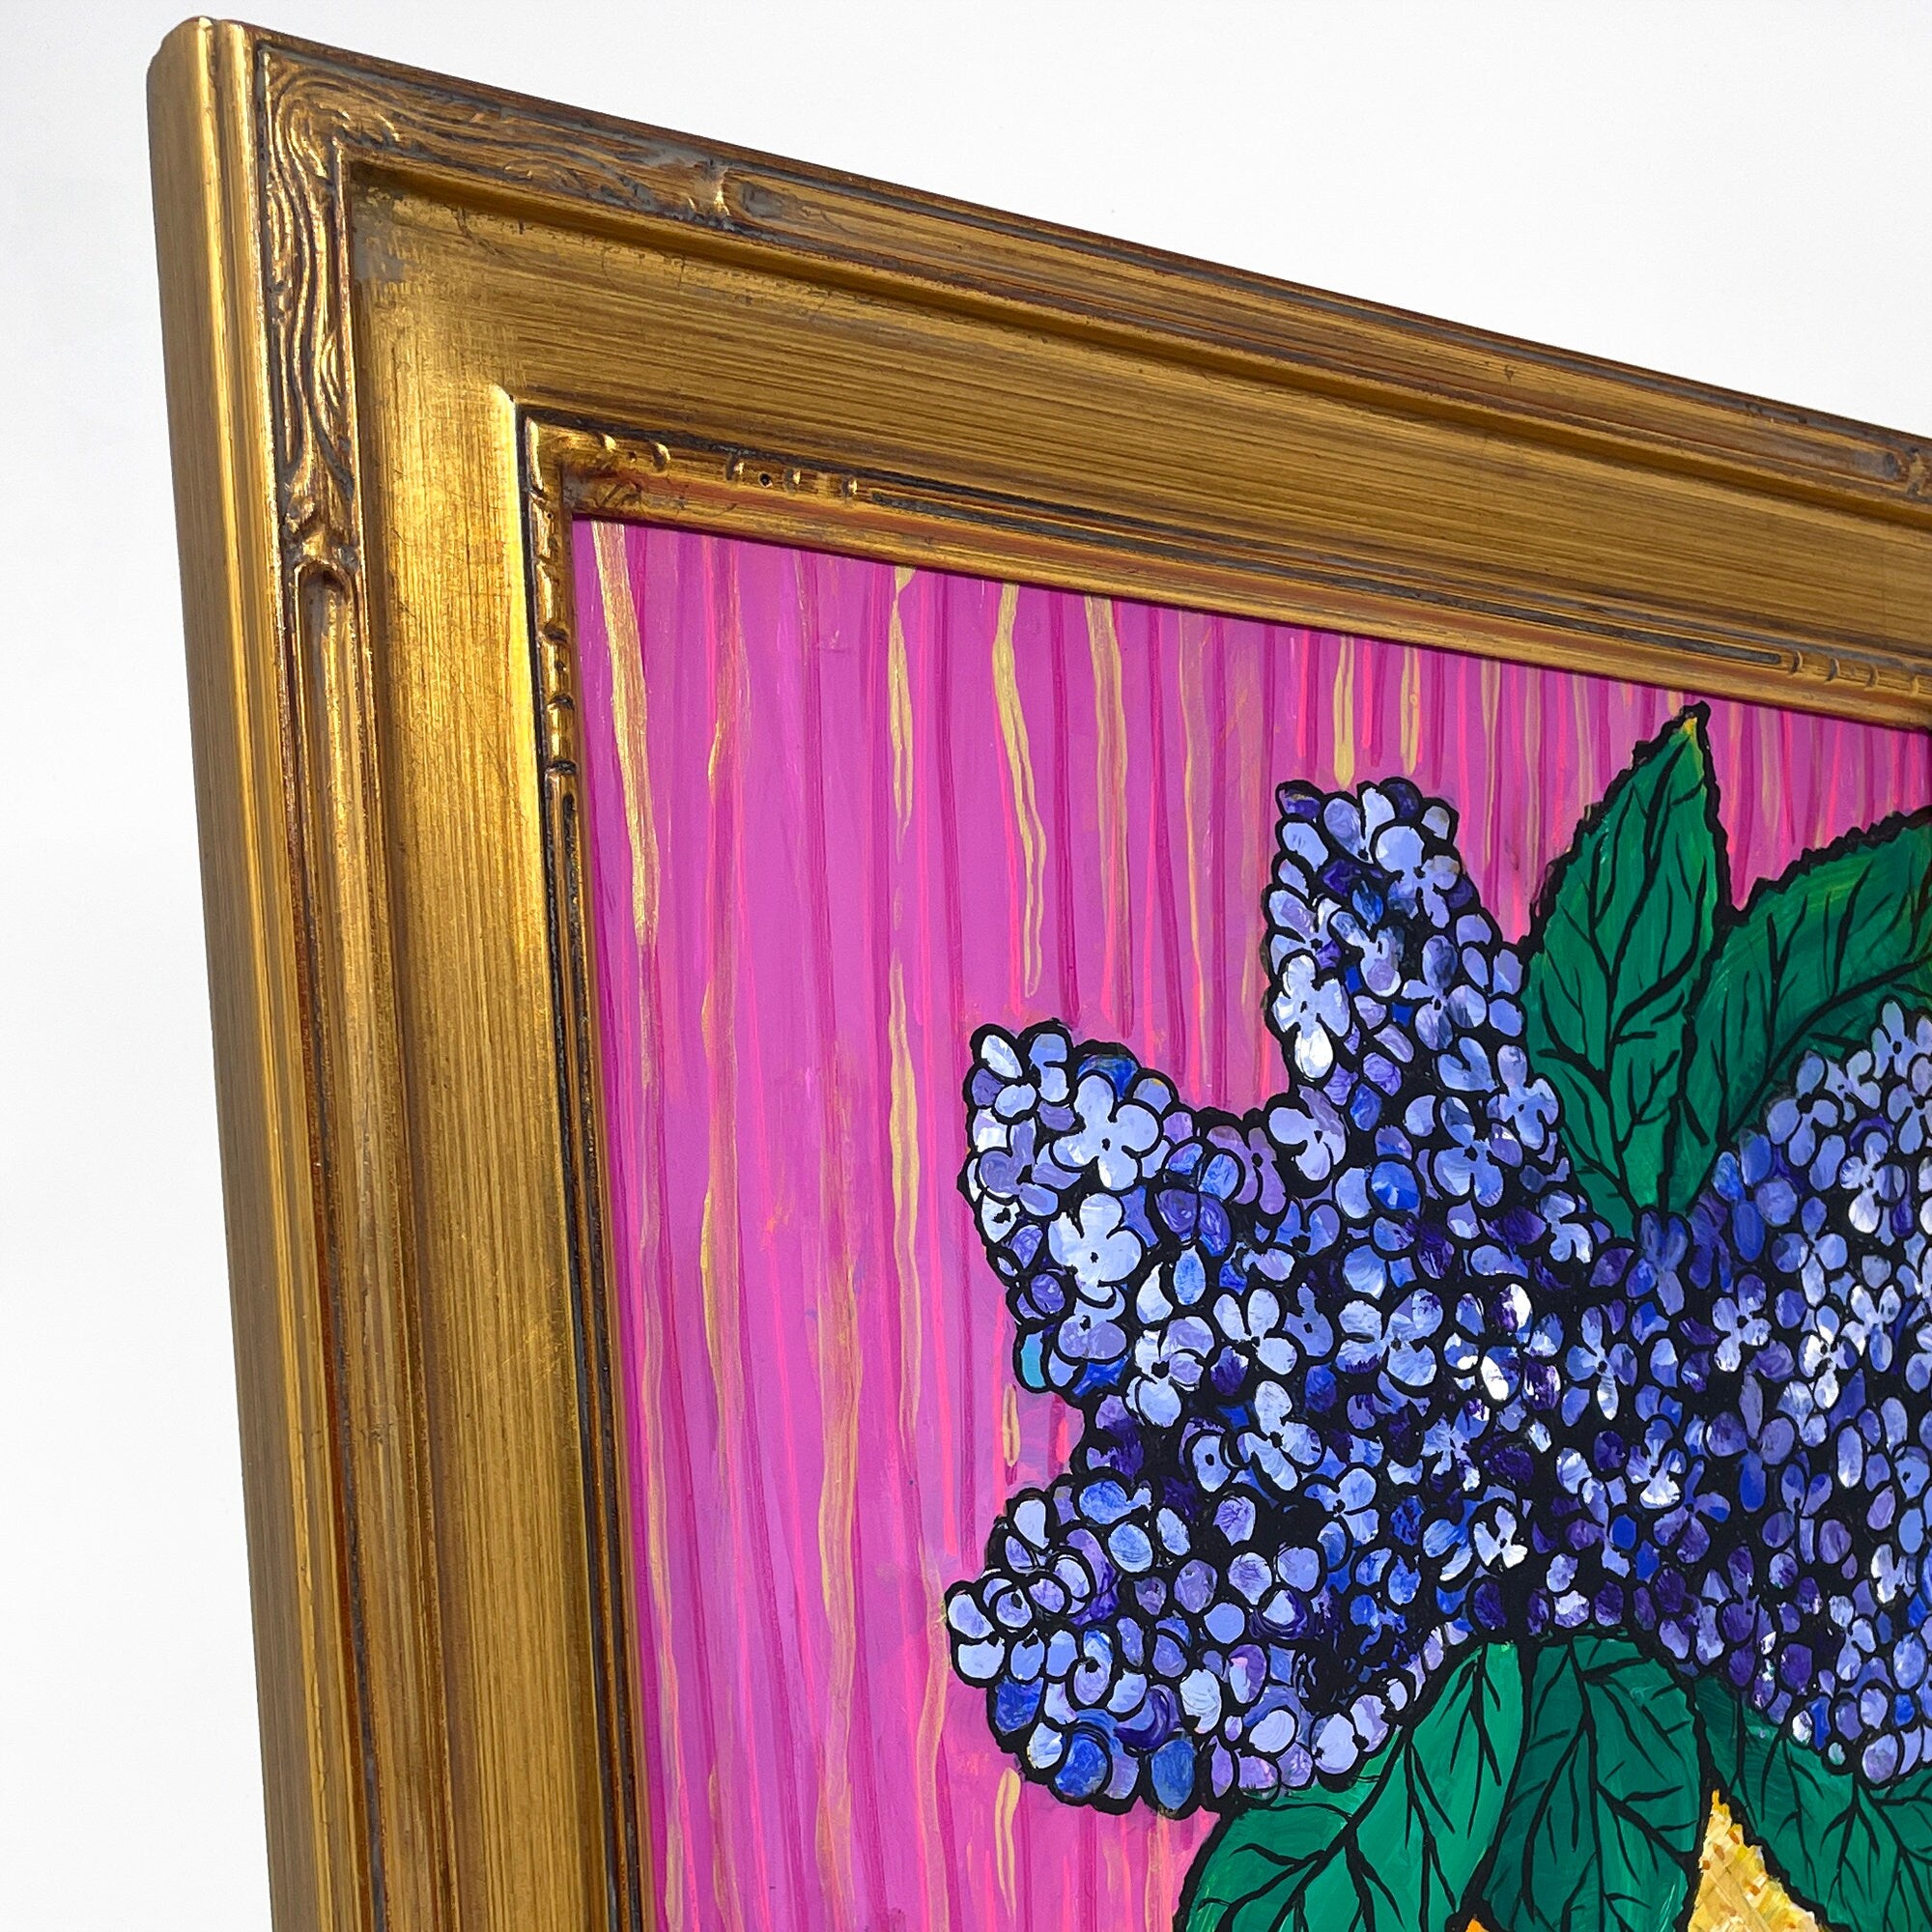 Original Purple Hydrangea Painting - Gold Frame Floral Still Life Painting - 11 x 14 inches - Vibrant Color Hydrangea Blooms in Vase